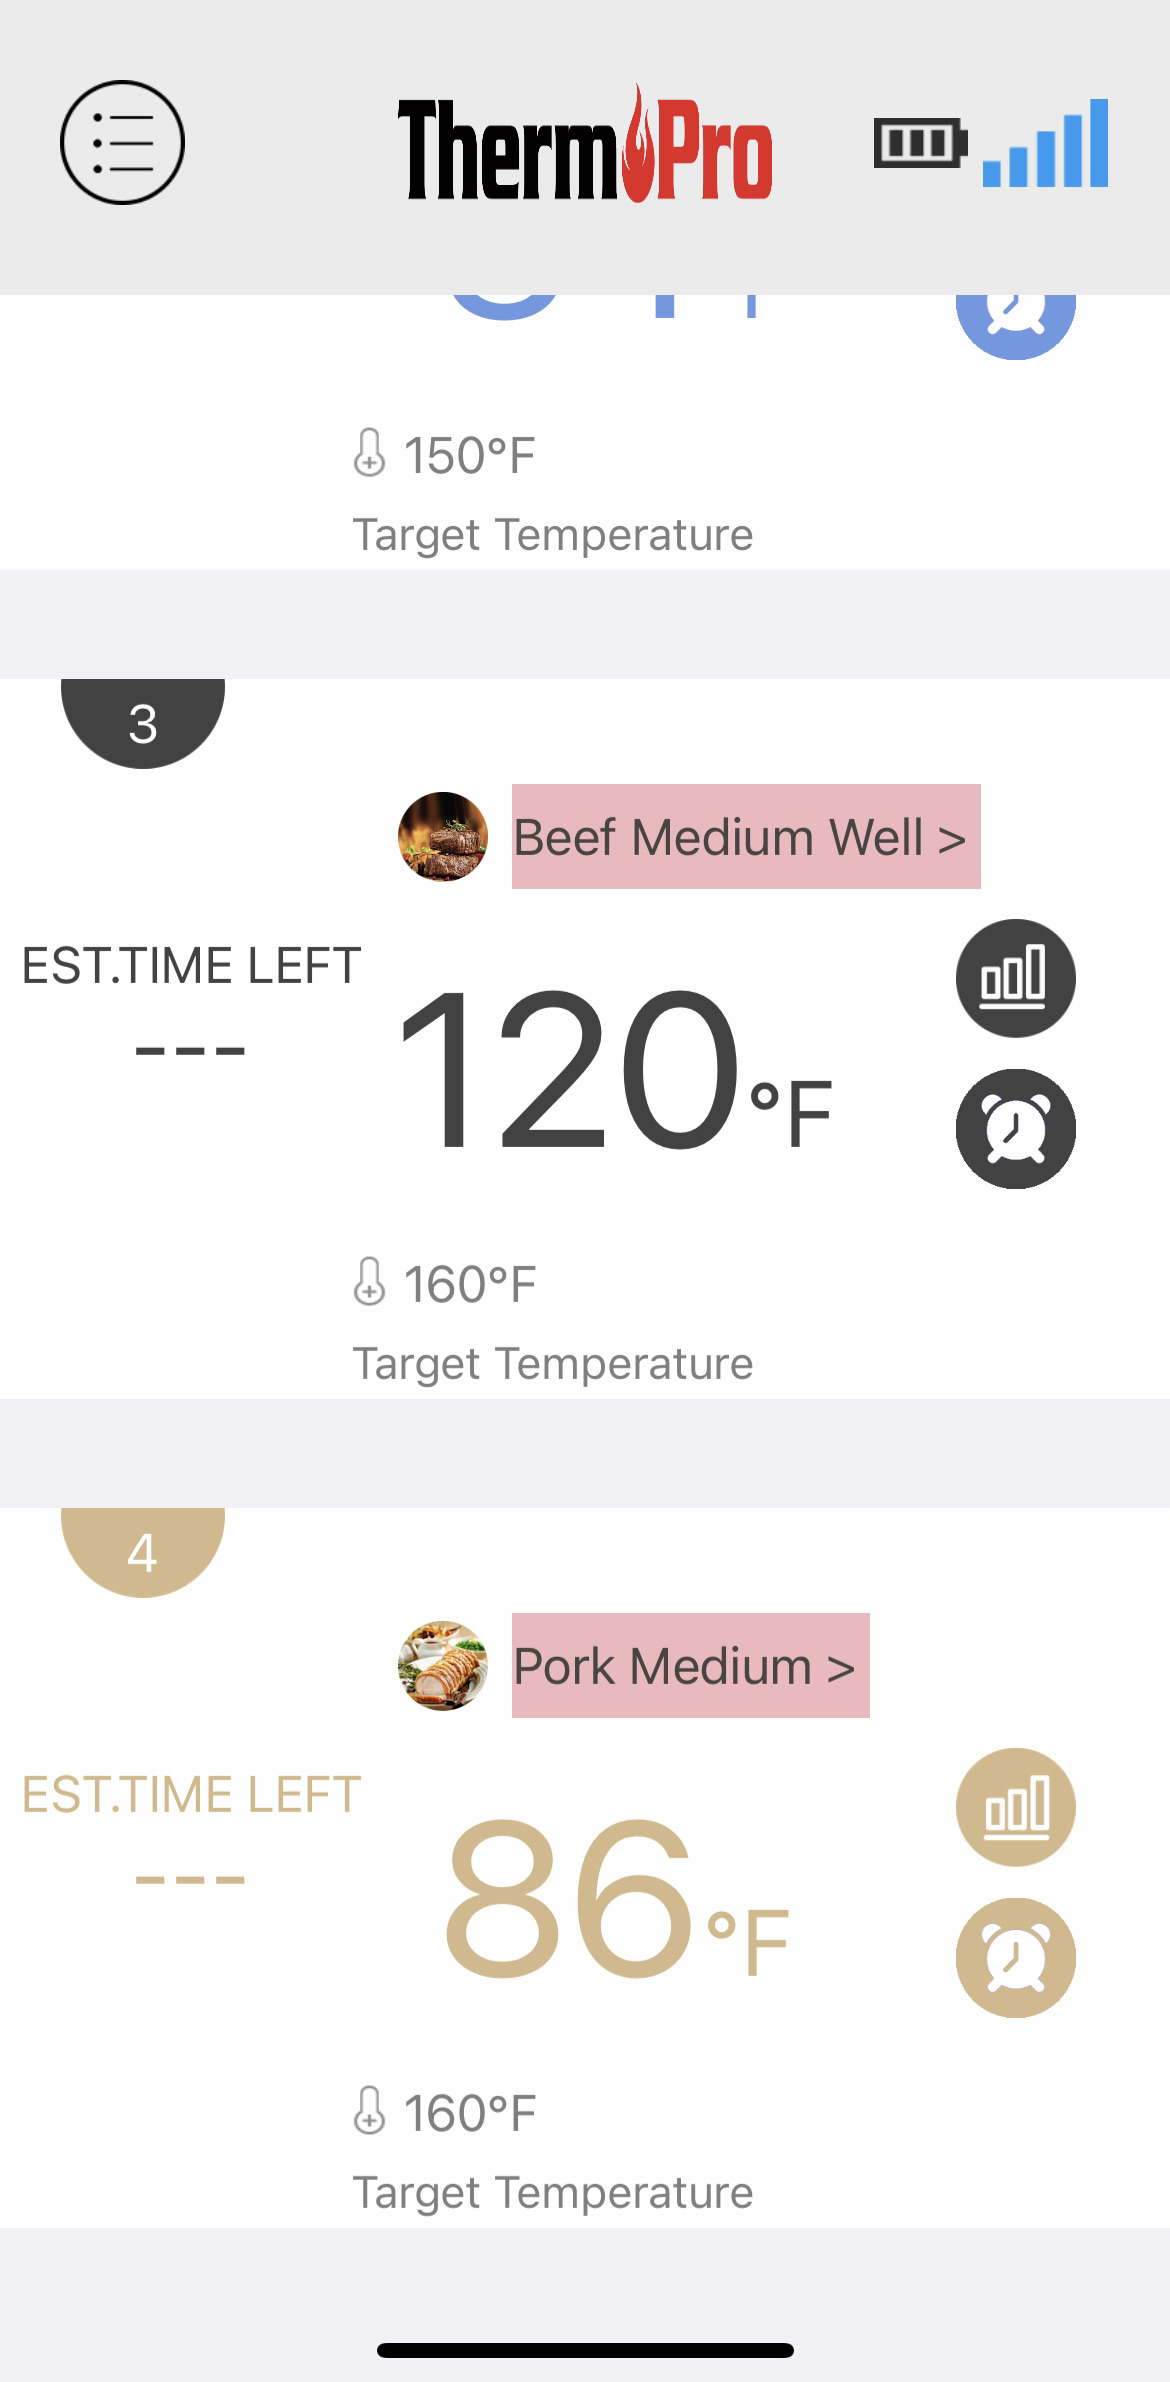 https://www.digitaltrends.com/wp-content/uploads/2022/08/ThermoPro-BBQ-meat-settings.jpeg?fit=1170%2C2382&p=1